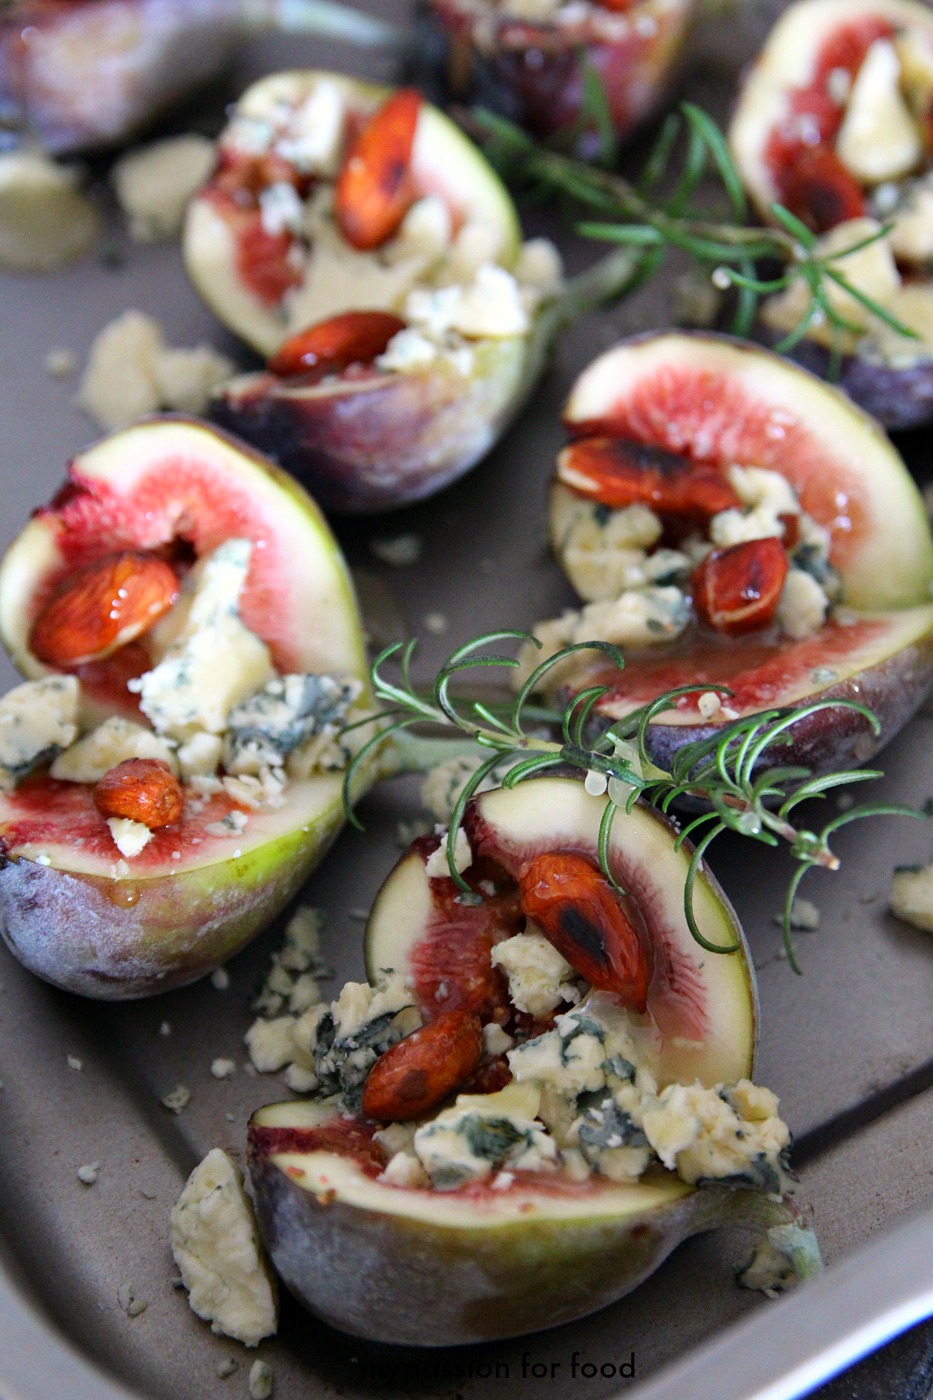 Story on the plate, Baked Figs with Rockford Cheese and Almonds (26 January 2015)